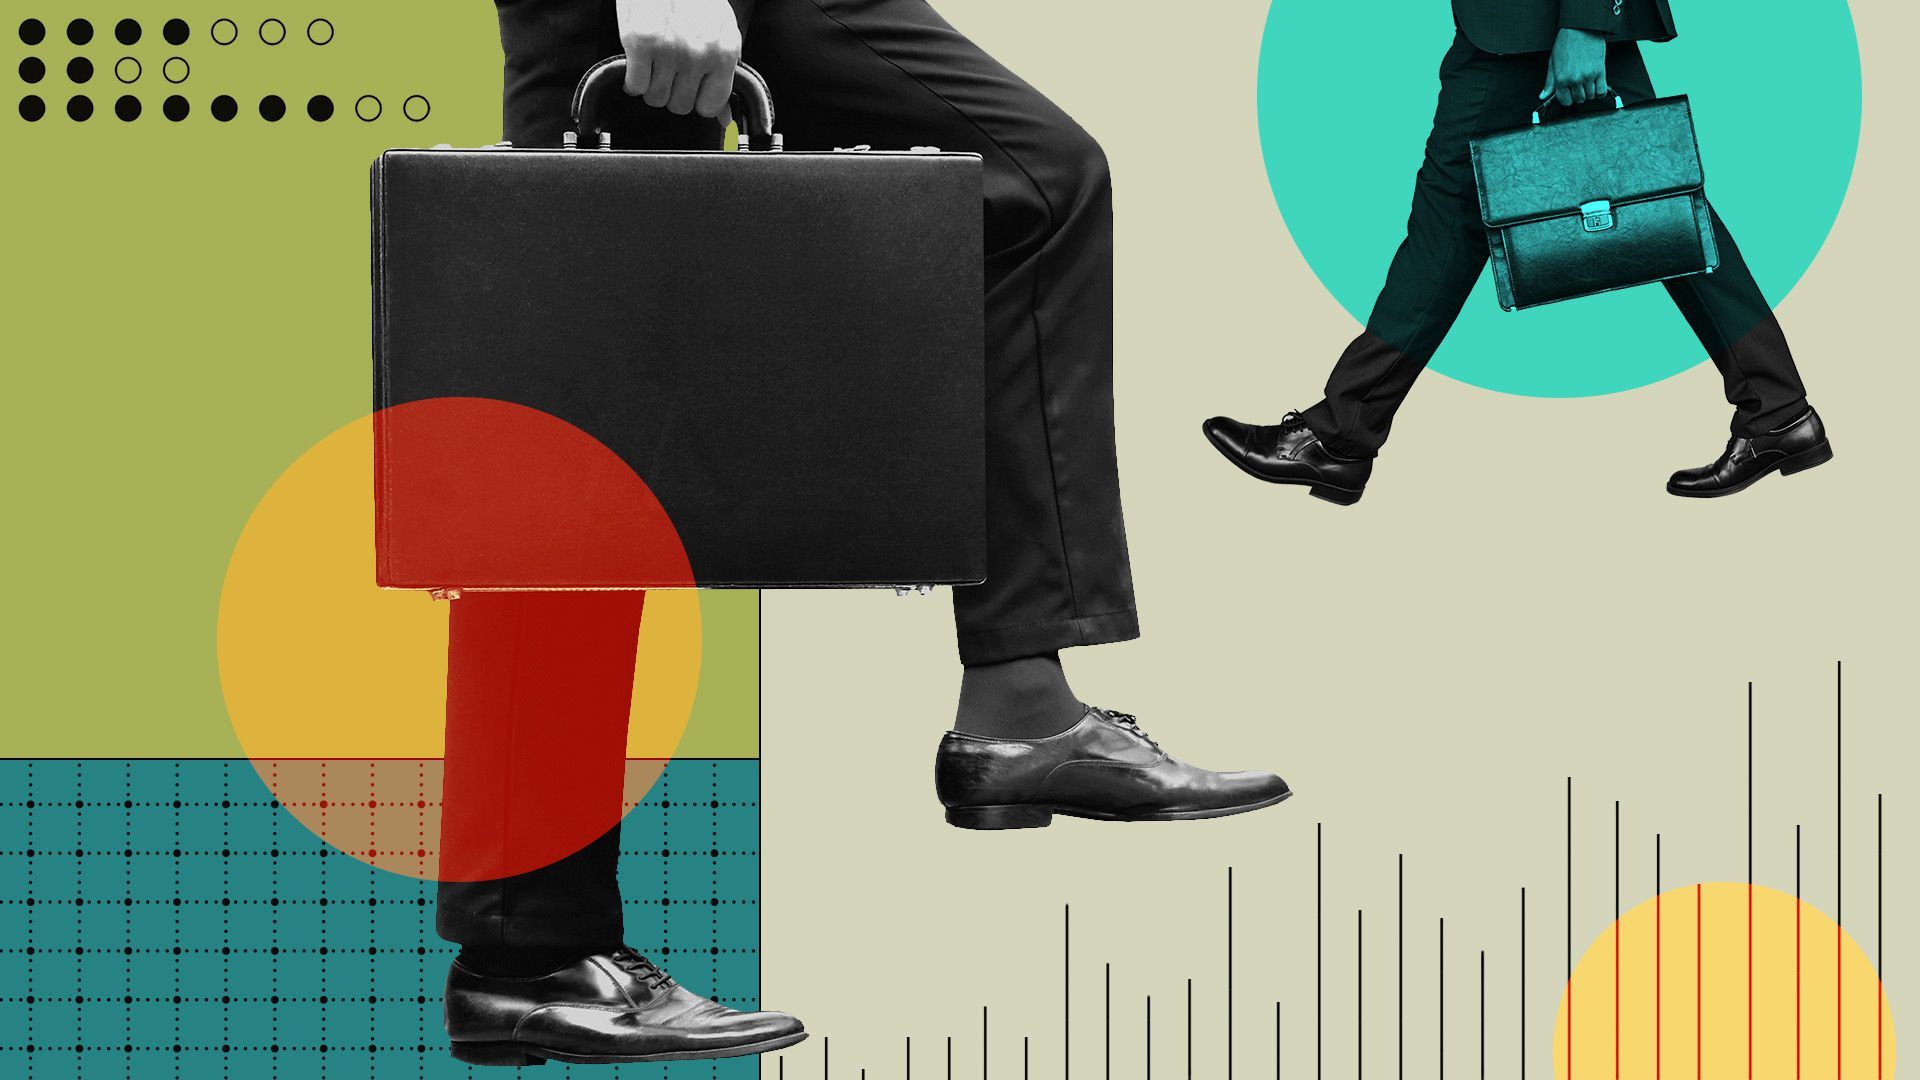 Illustrated collage of two businessmen walking in different directions, surrounded by shapes and grids